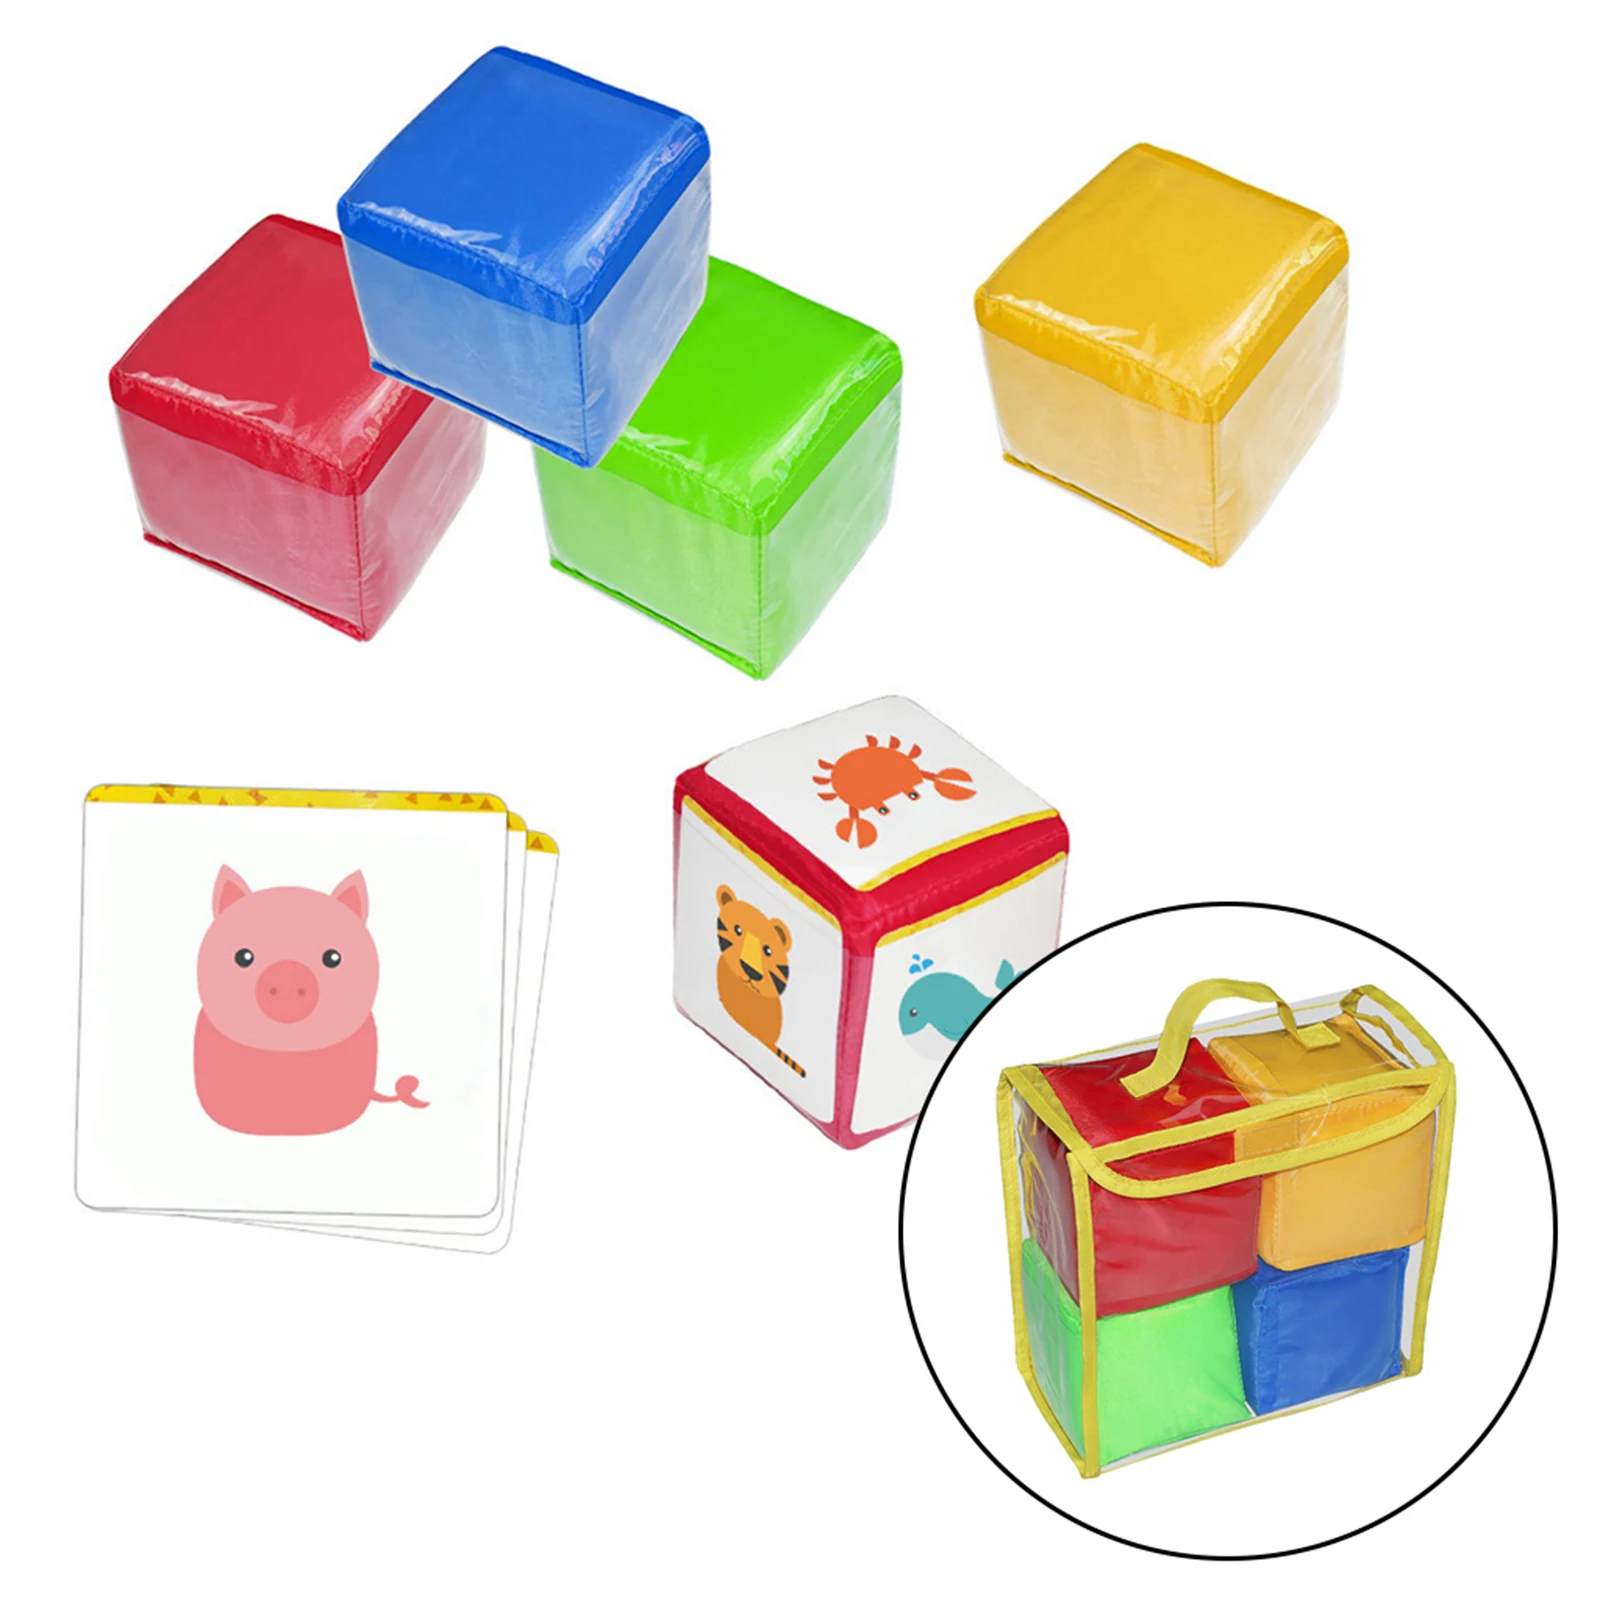 4x 10cm Playing Game Dices Set Soft Foam Cubes with Clear Pockets Customizable Learning Cubes